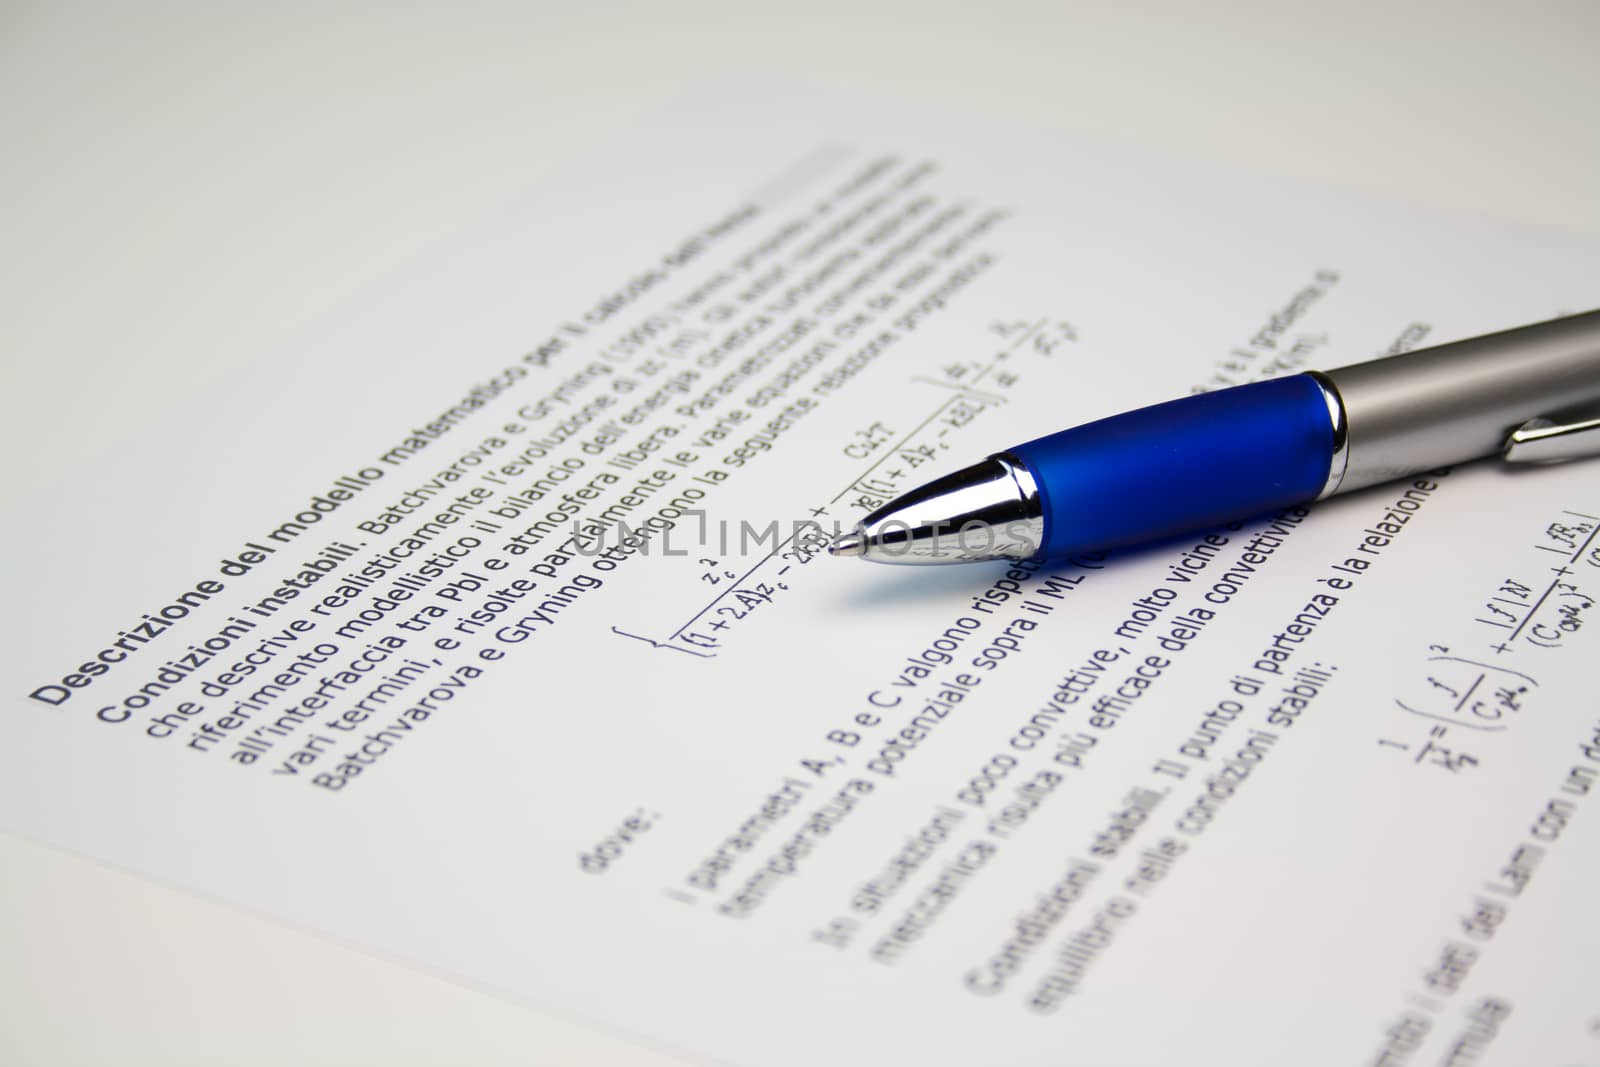 Detail view of  scientific paper image with a pen lying